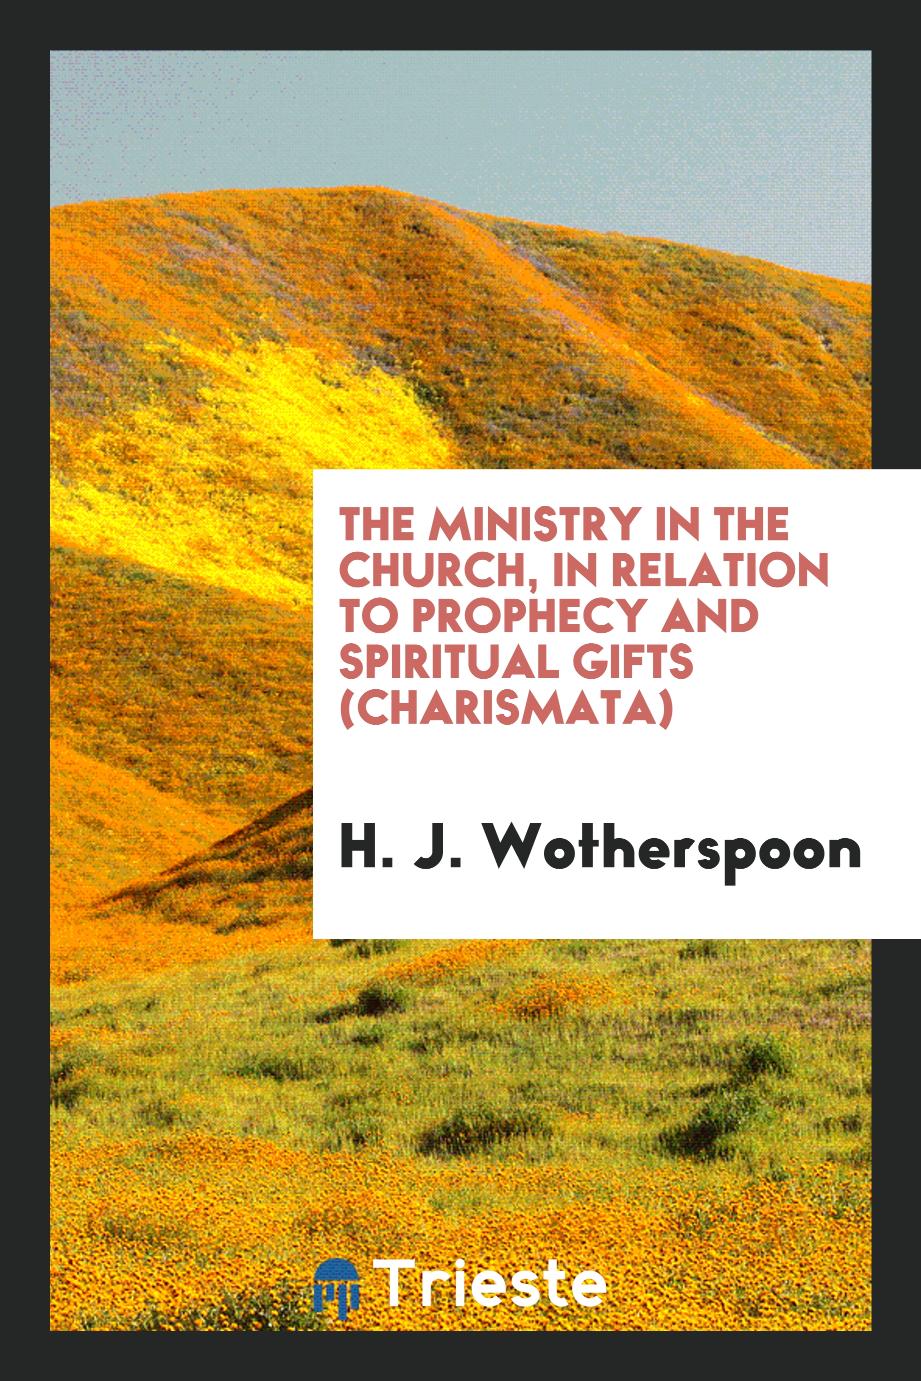 The ministry in the Church, in relation to prophecy and spiritual gifts (Charismata)